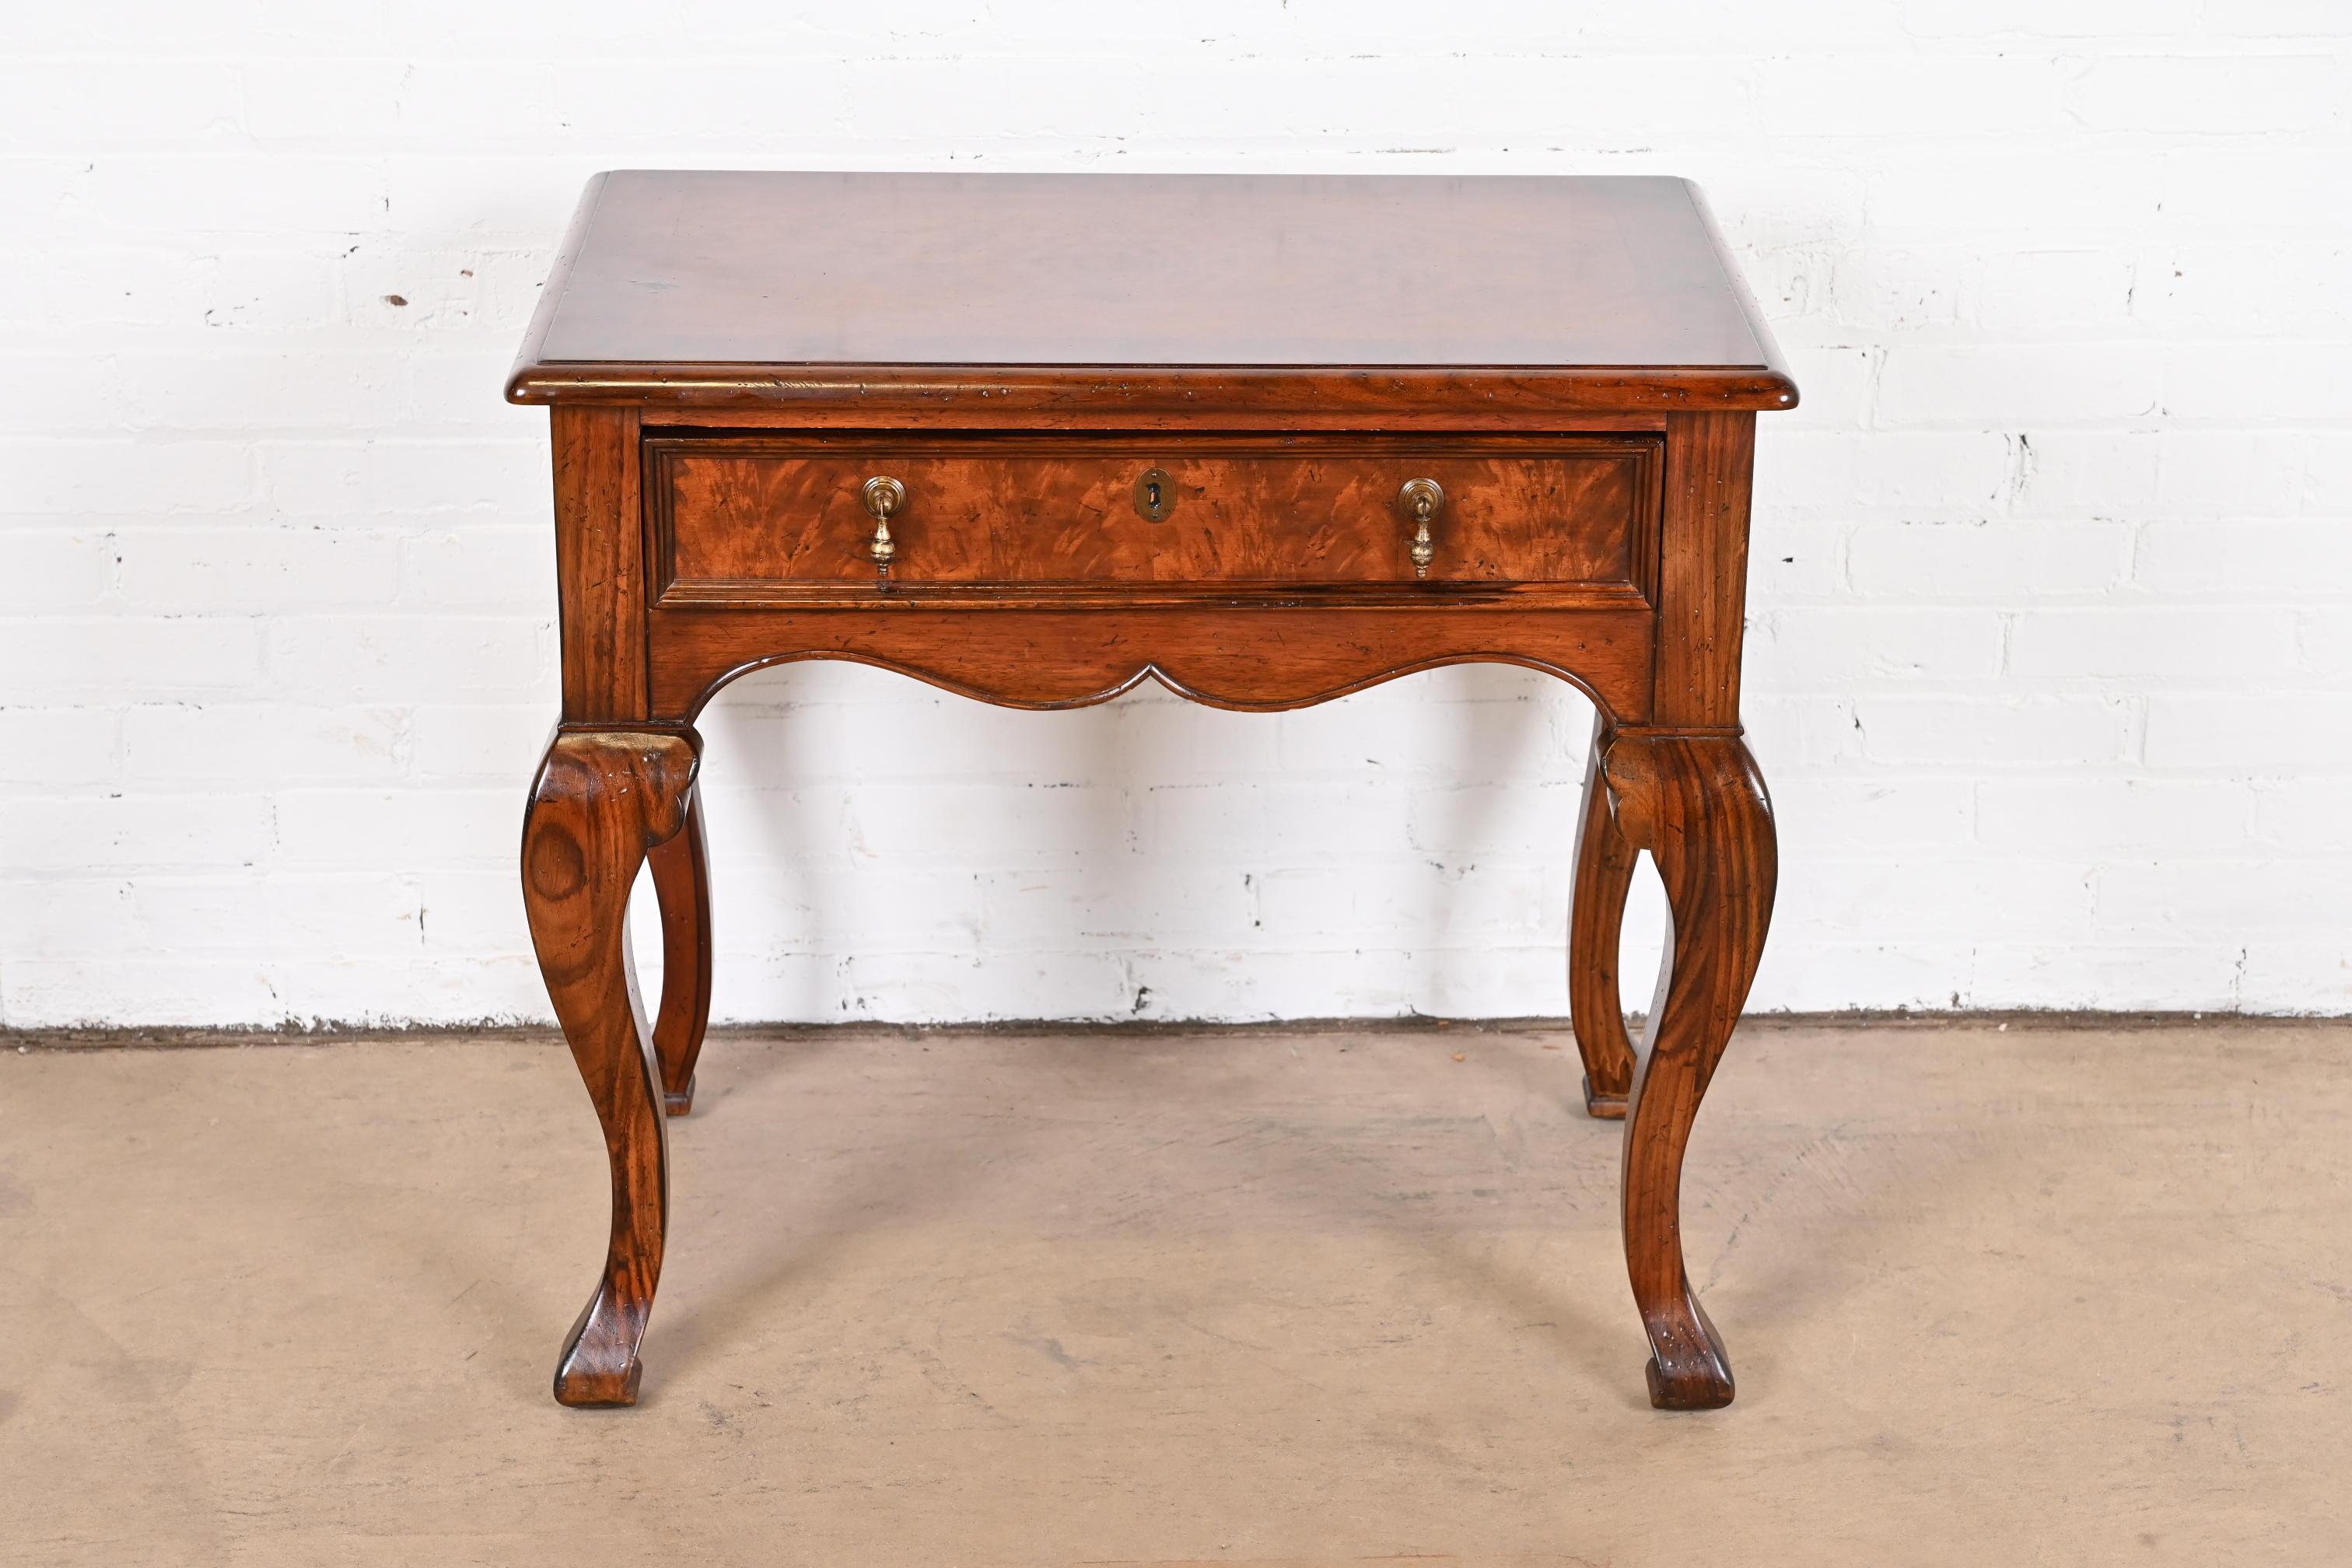 A gorgeous Italian Provincial dressing table, vanity, or occasional side table

By Baker Furniture, 